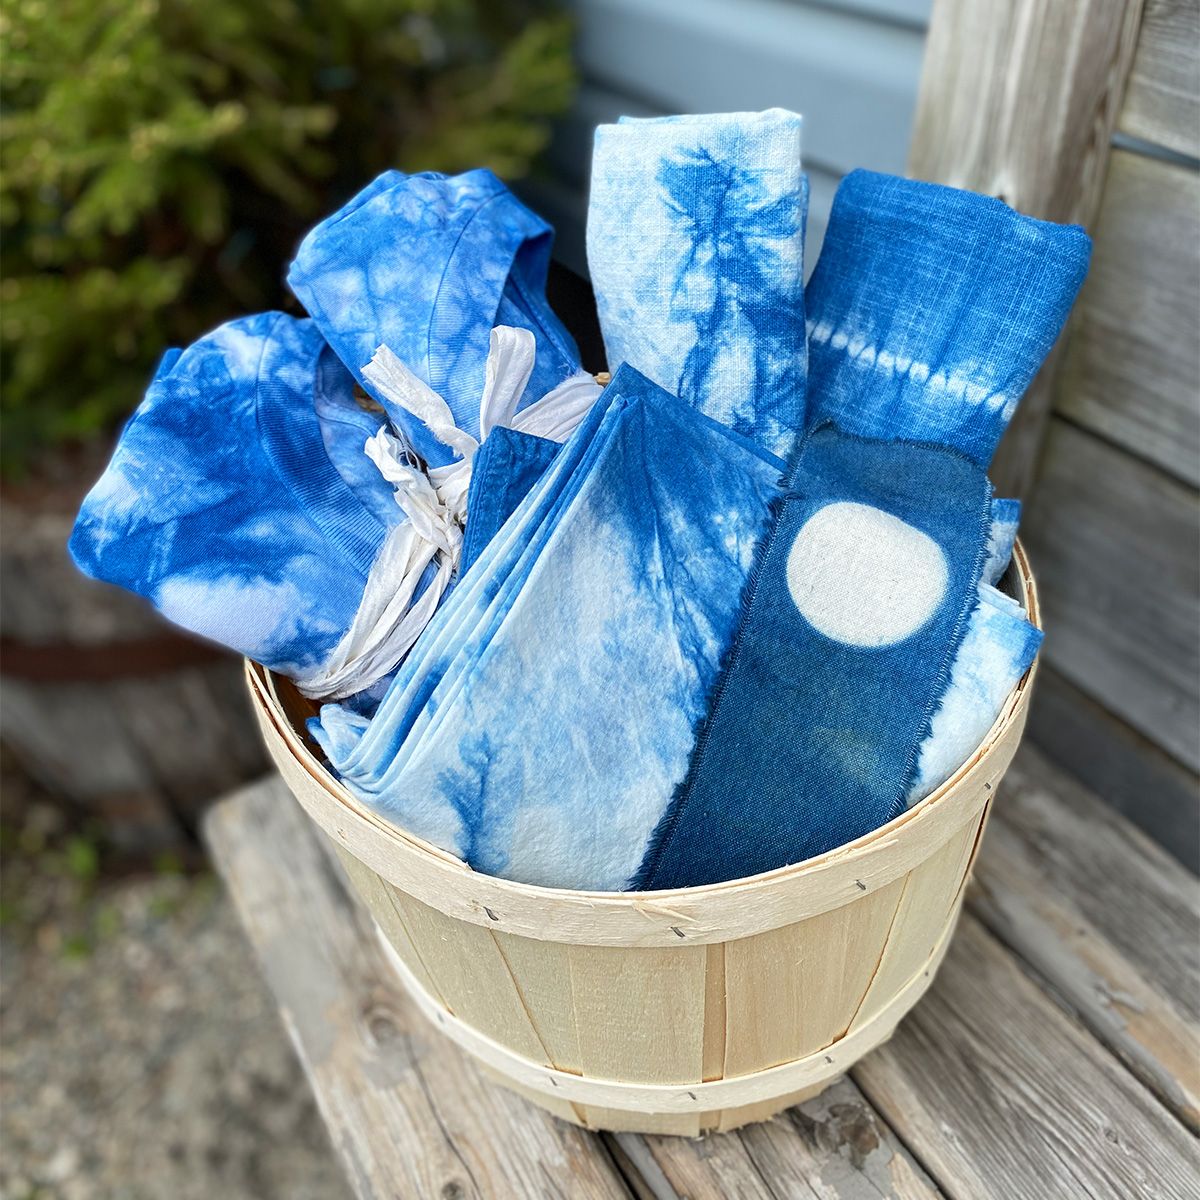 A basket on a table outdoors filled with folded indigo-dyed T-shirts, bookmarks and other textile products